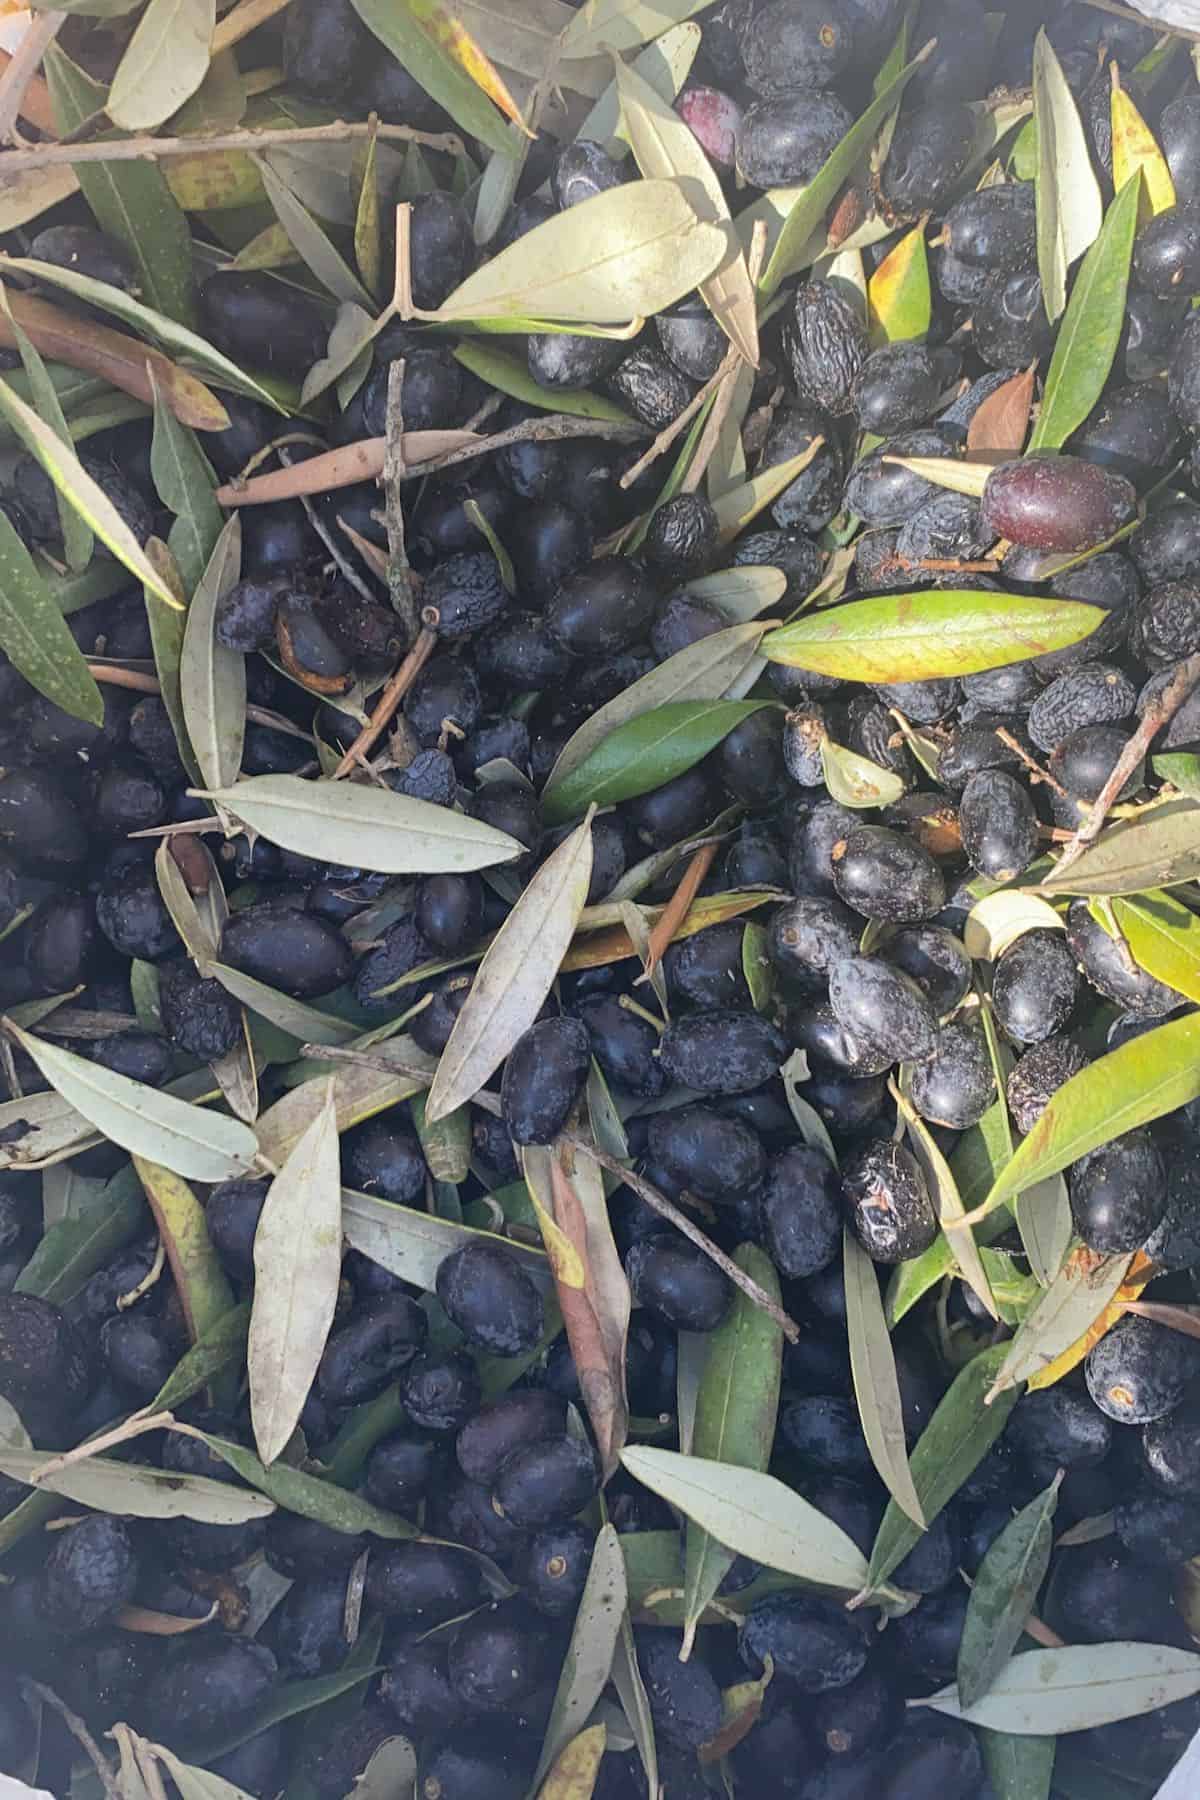 Black olives and some leaves